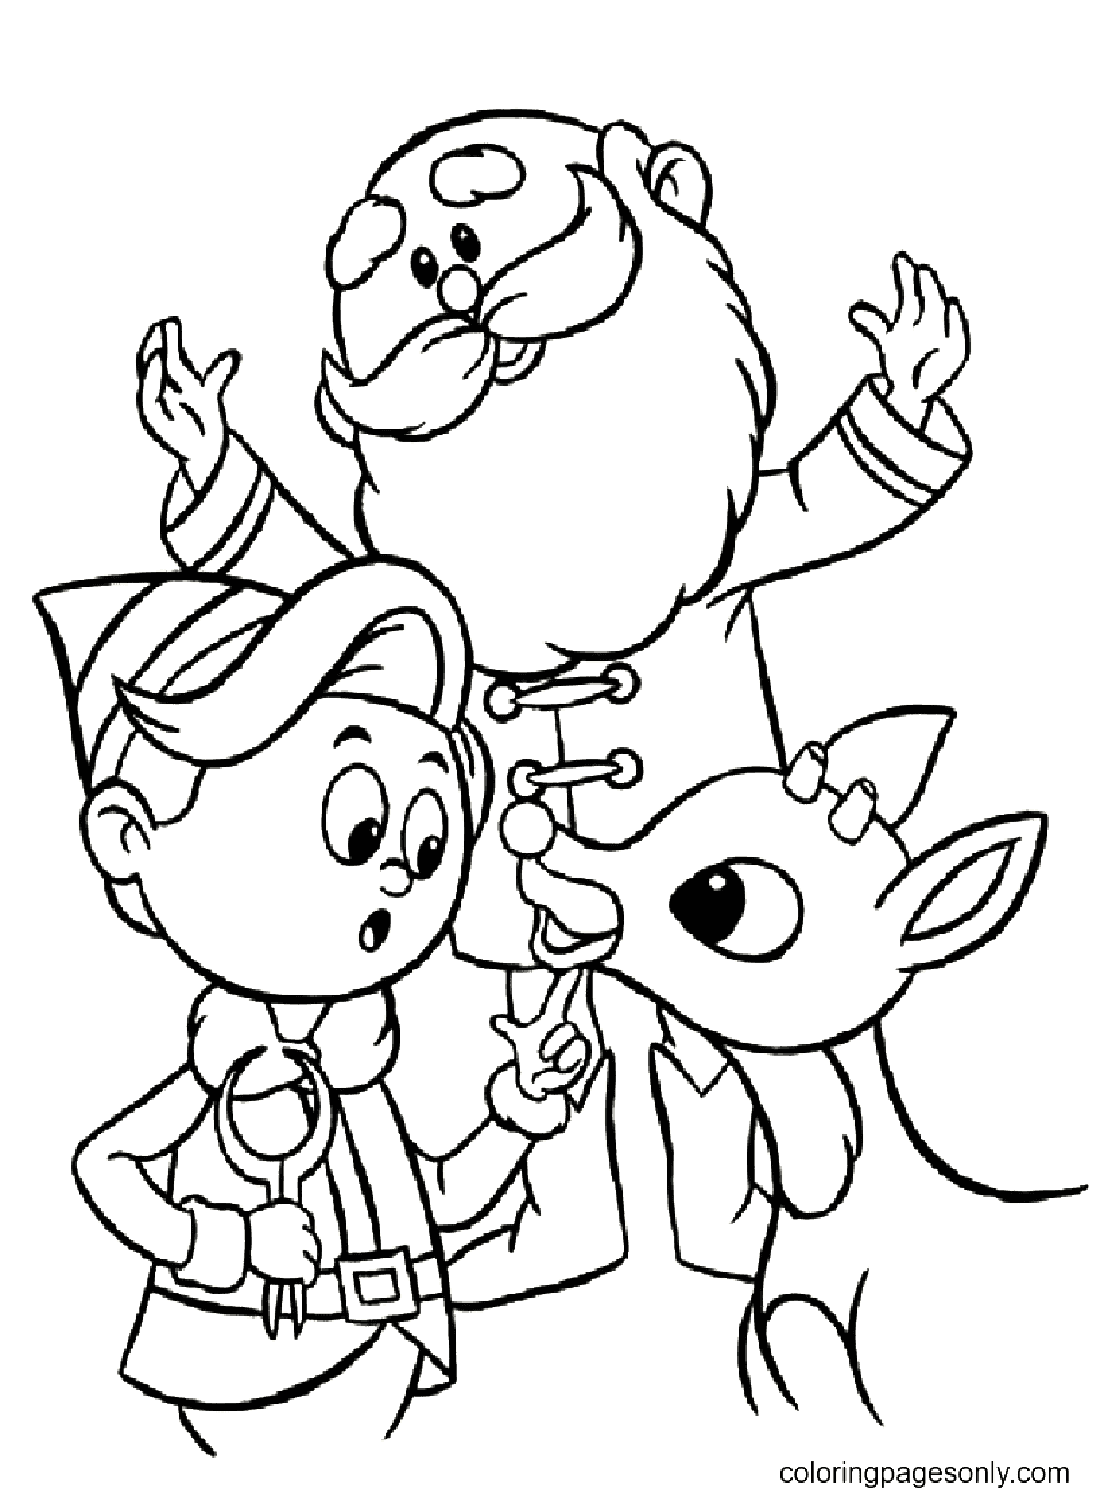 Santa And Elves Coloring Pages